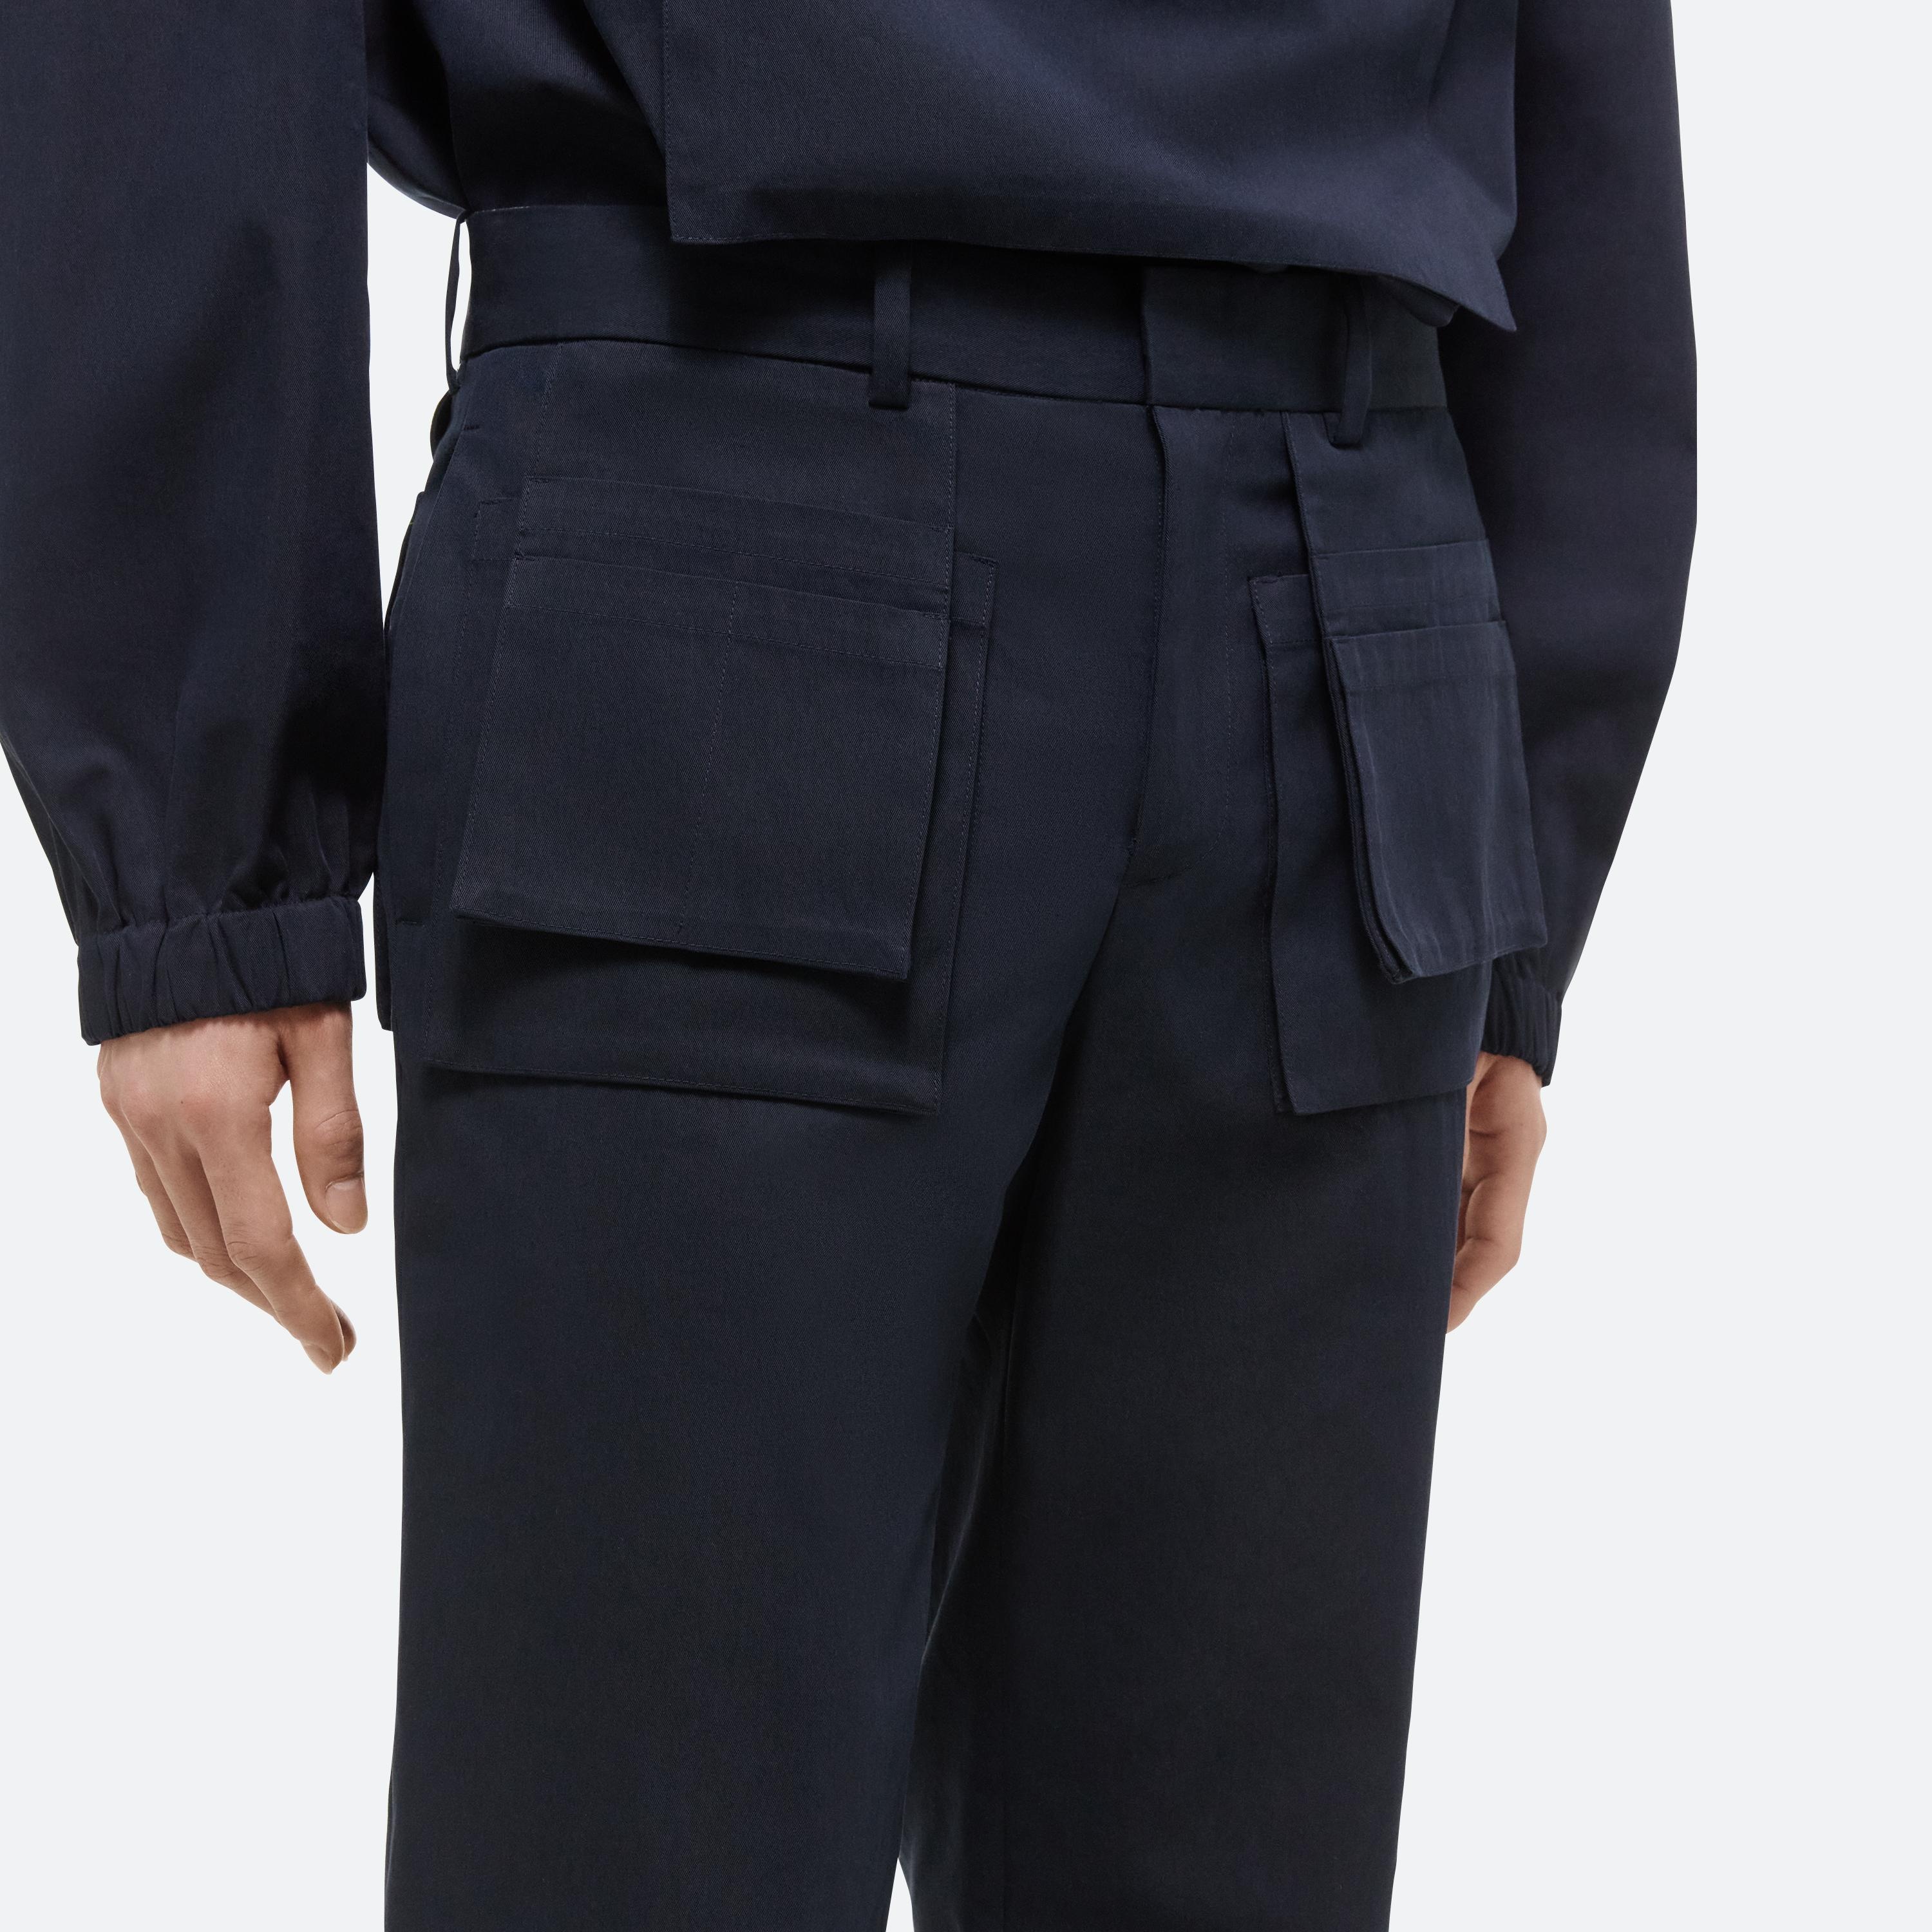 UTILITY CAR TROUSERS - 5